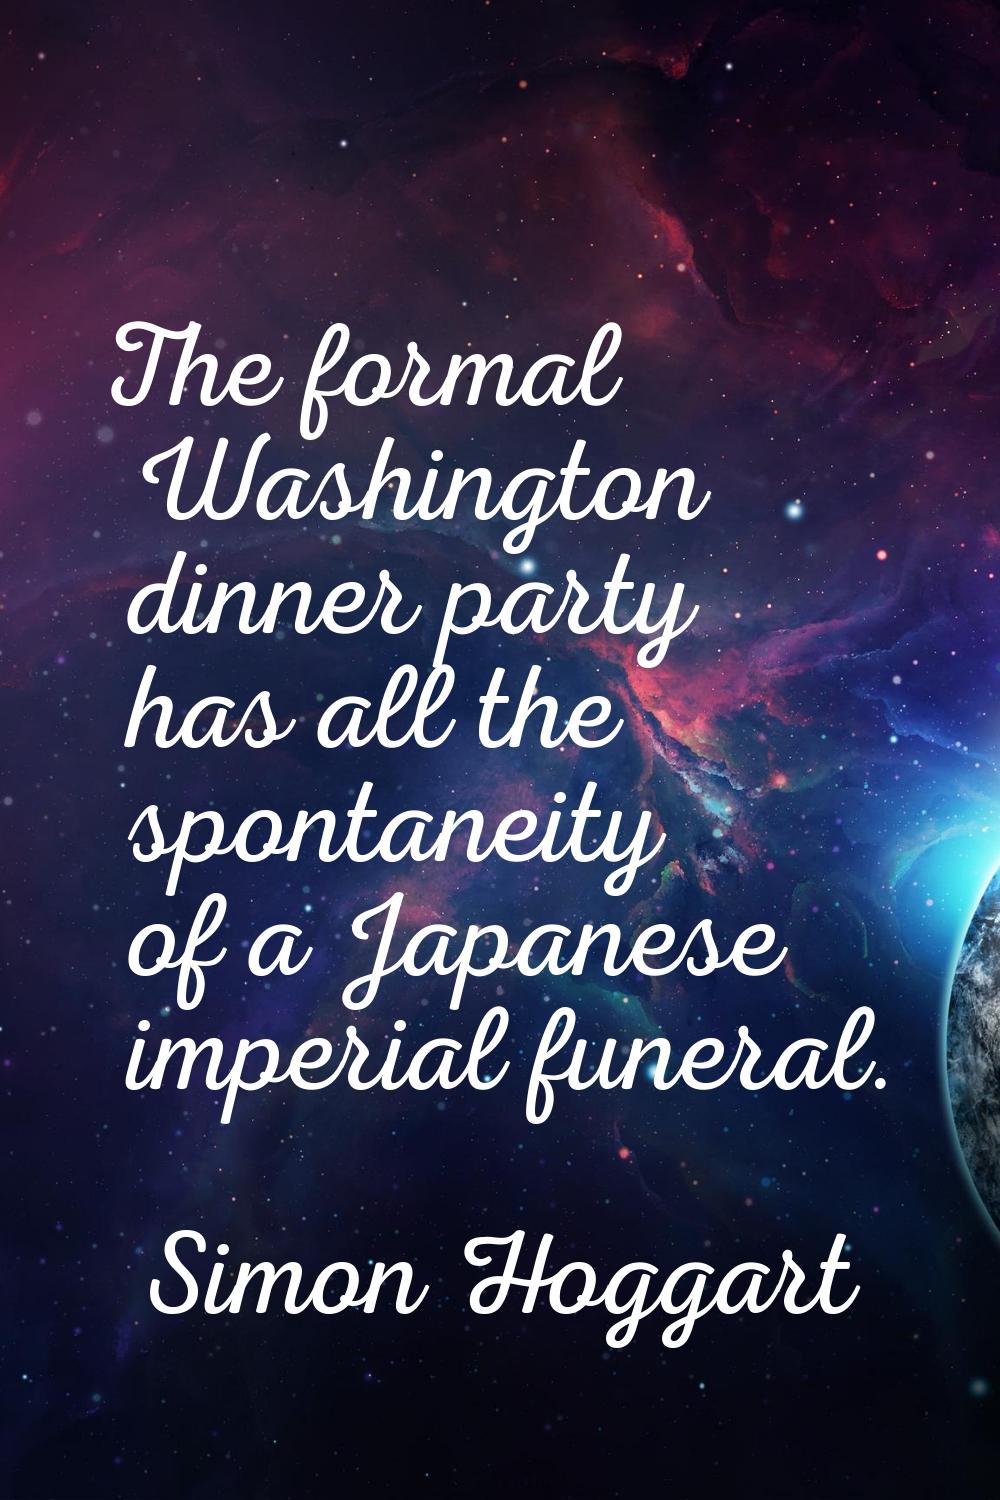 The formal Washington dinner party has all the spontaneity of a Japanese imperial funeral.